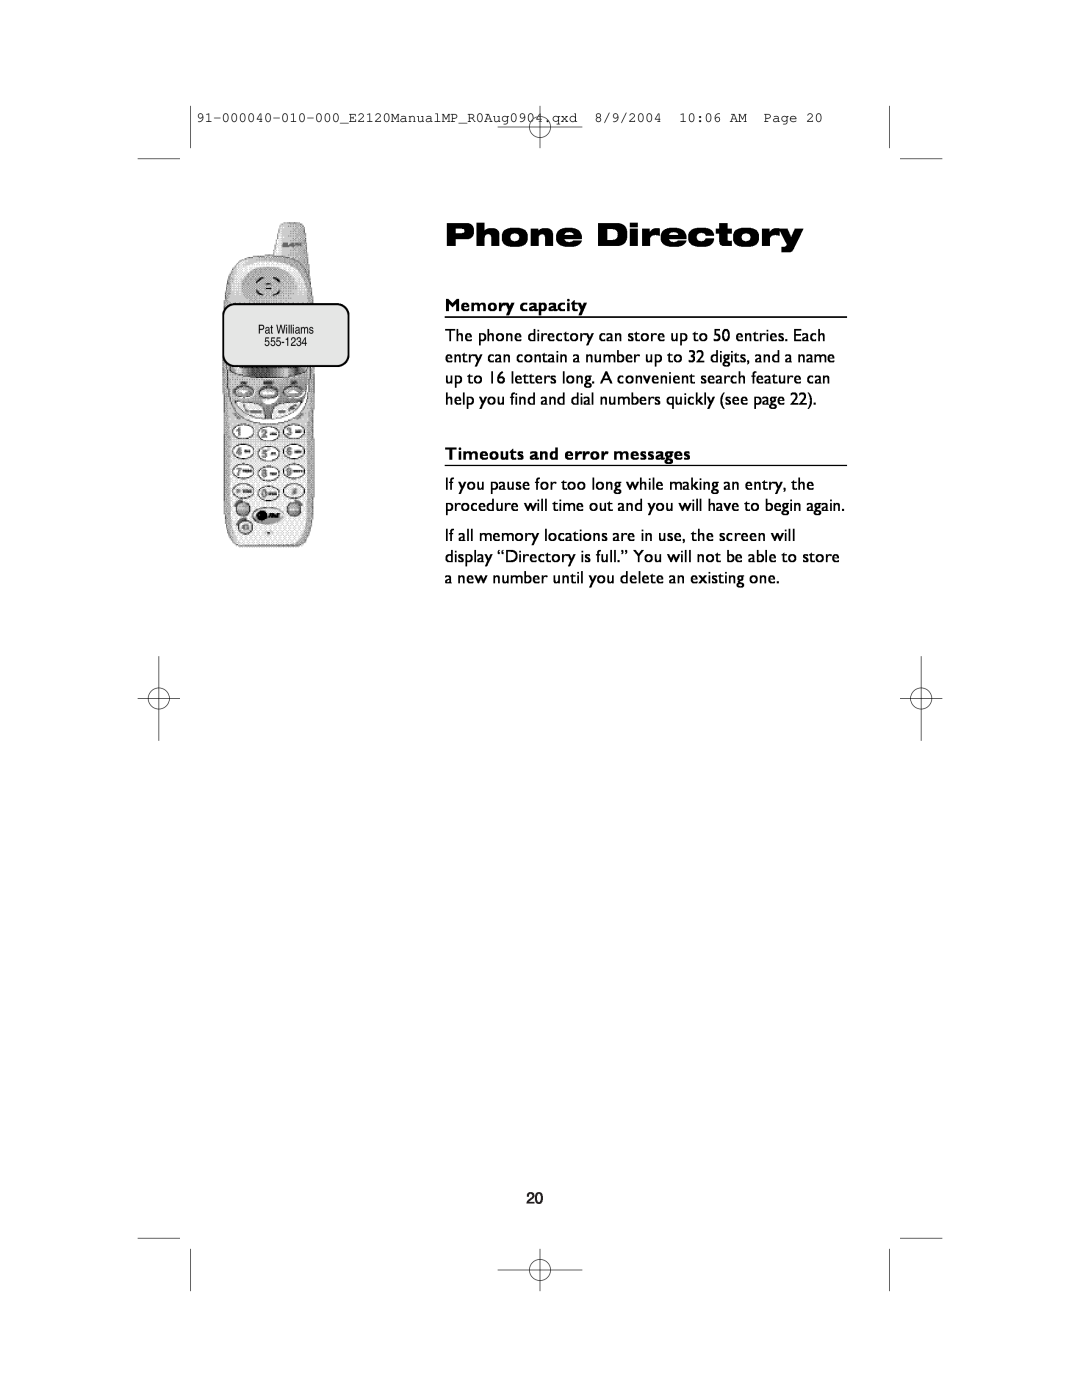 AT&T ATT-E2120 user manual Phone Directory, Memory capacity, Timeouts and error messages 